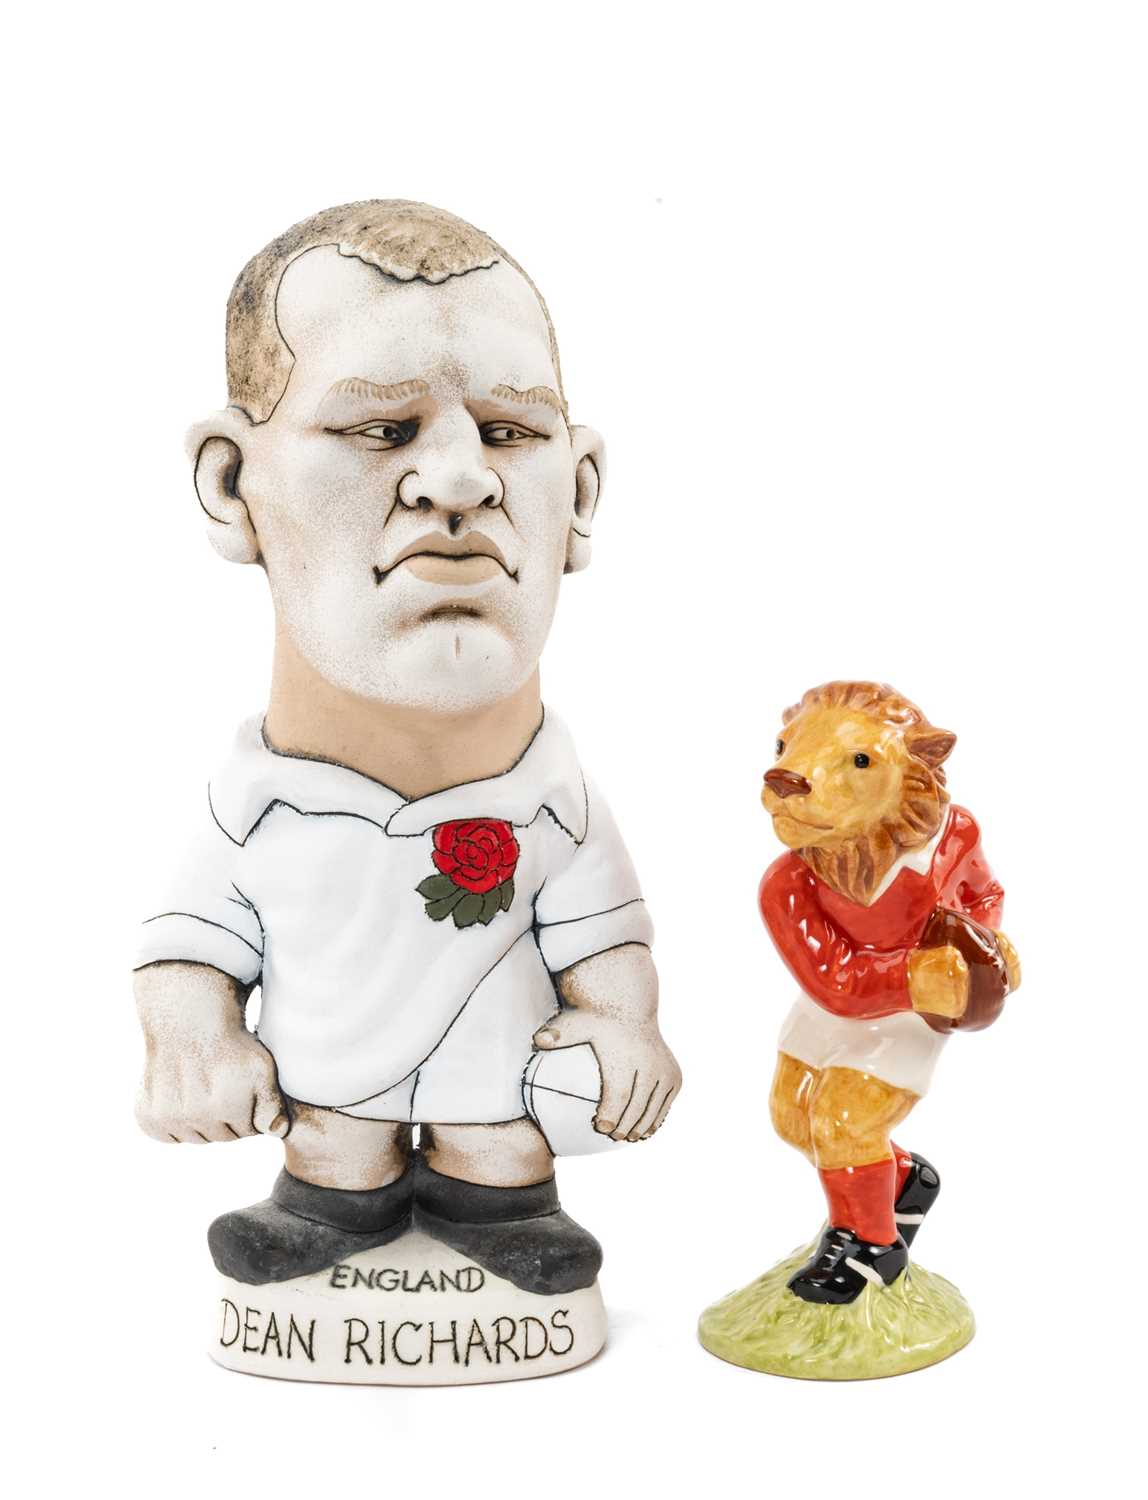 GROGG CARICATURE BY JOHN HUGHES OF DEAN RICHARDS (England International Rugby Union player with 48